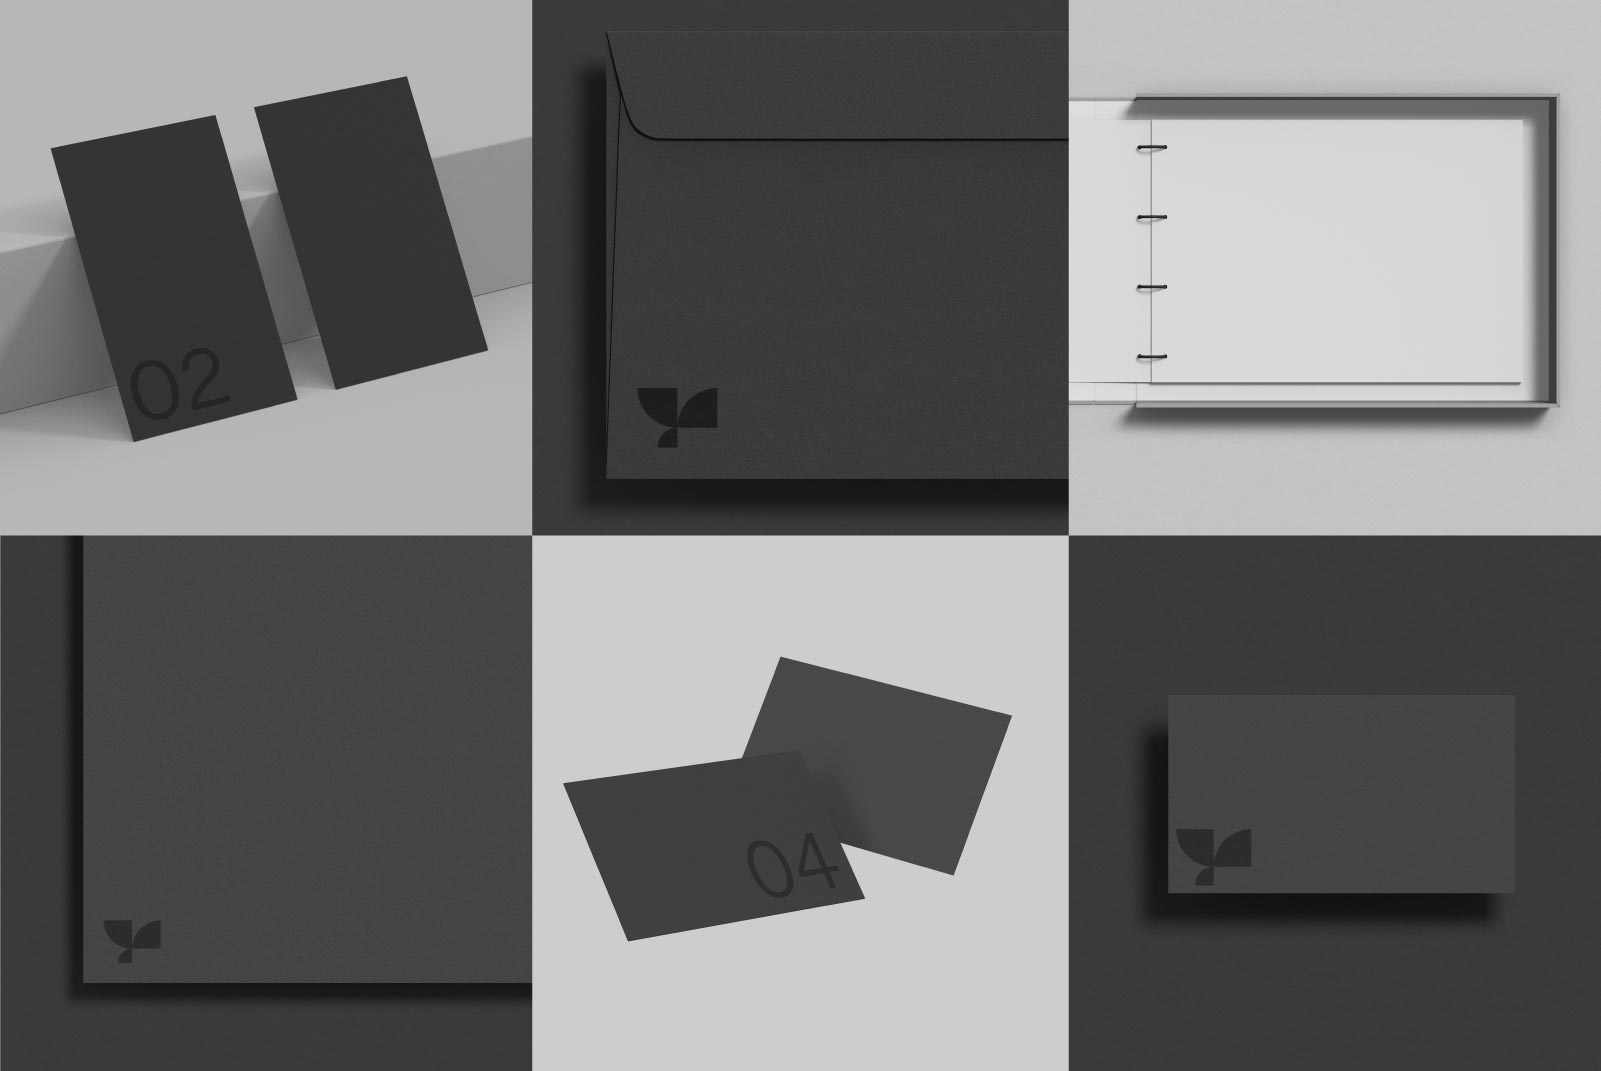 Stationery mockup collection with a minimalist black design including business cards, folder, notebook, and envelope for branding presentations.